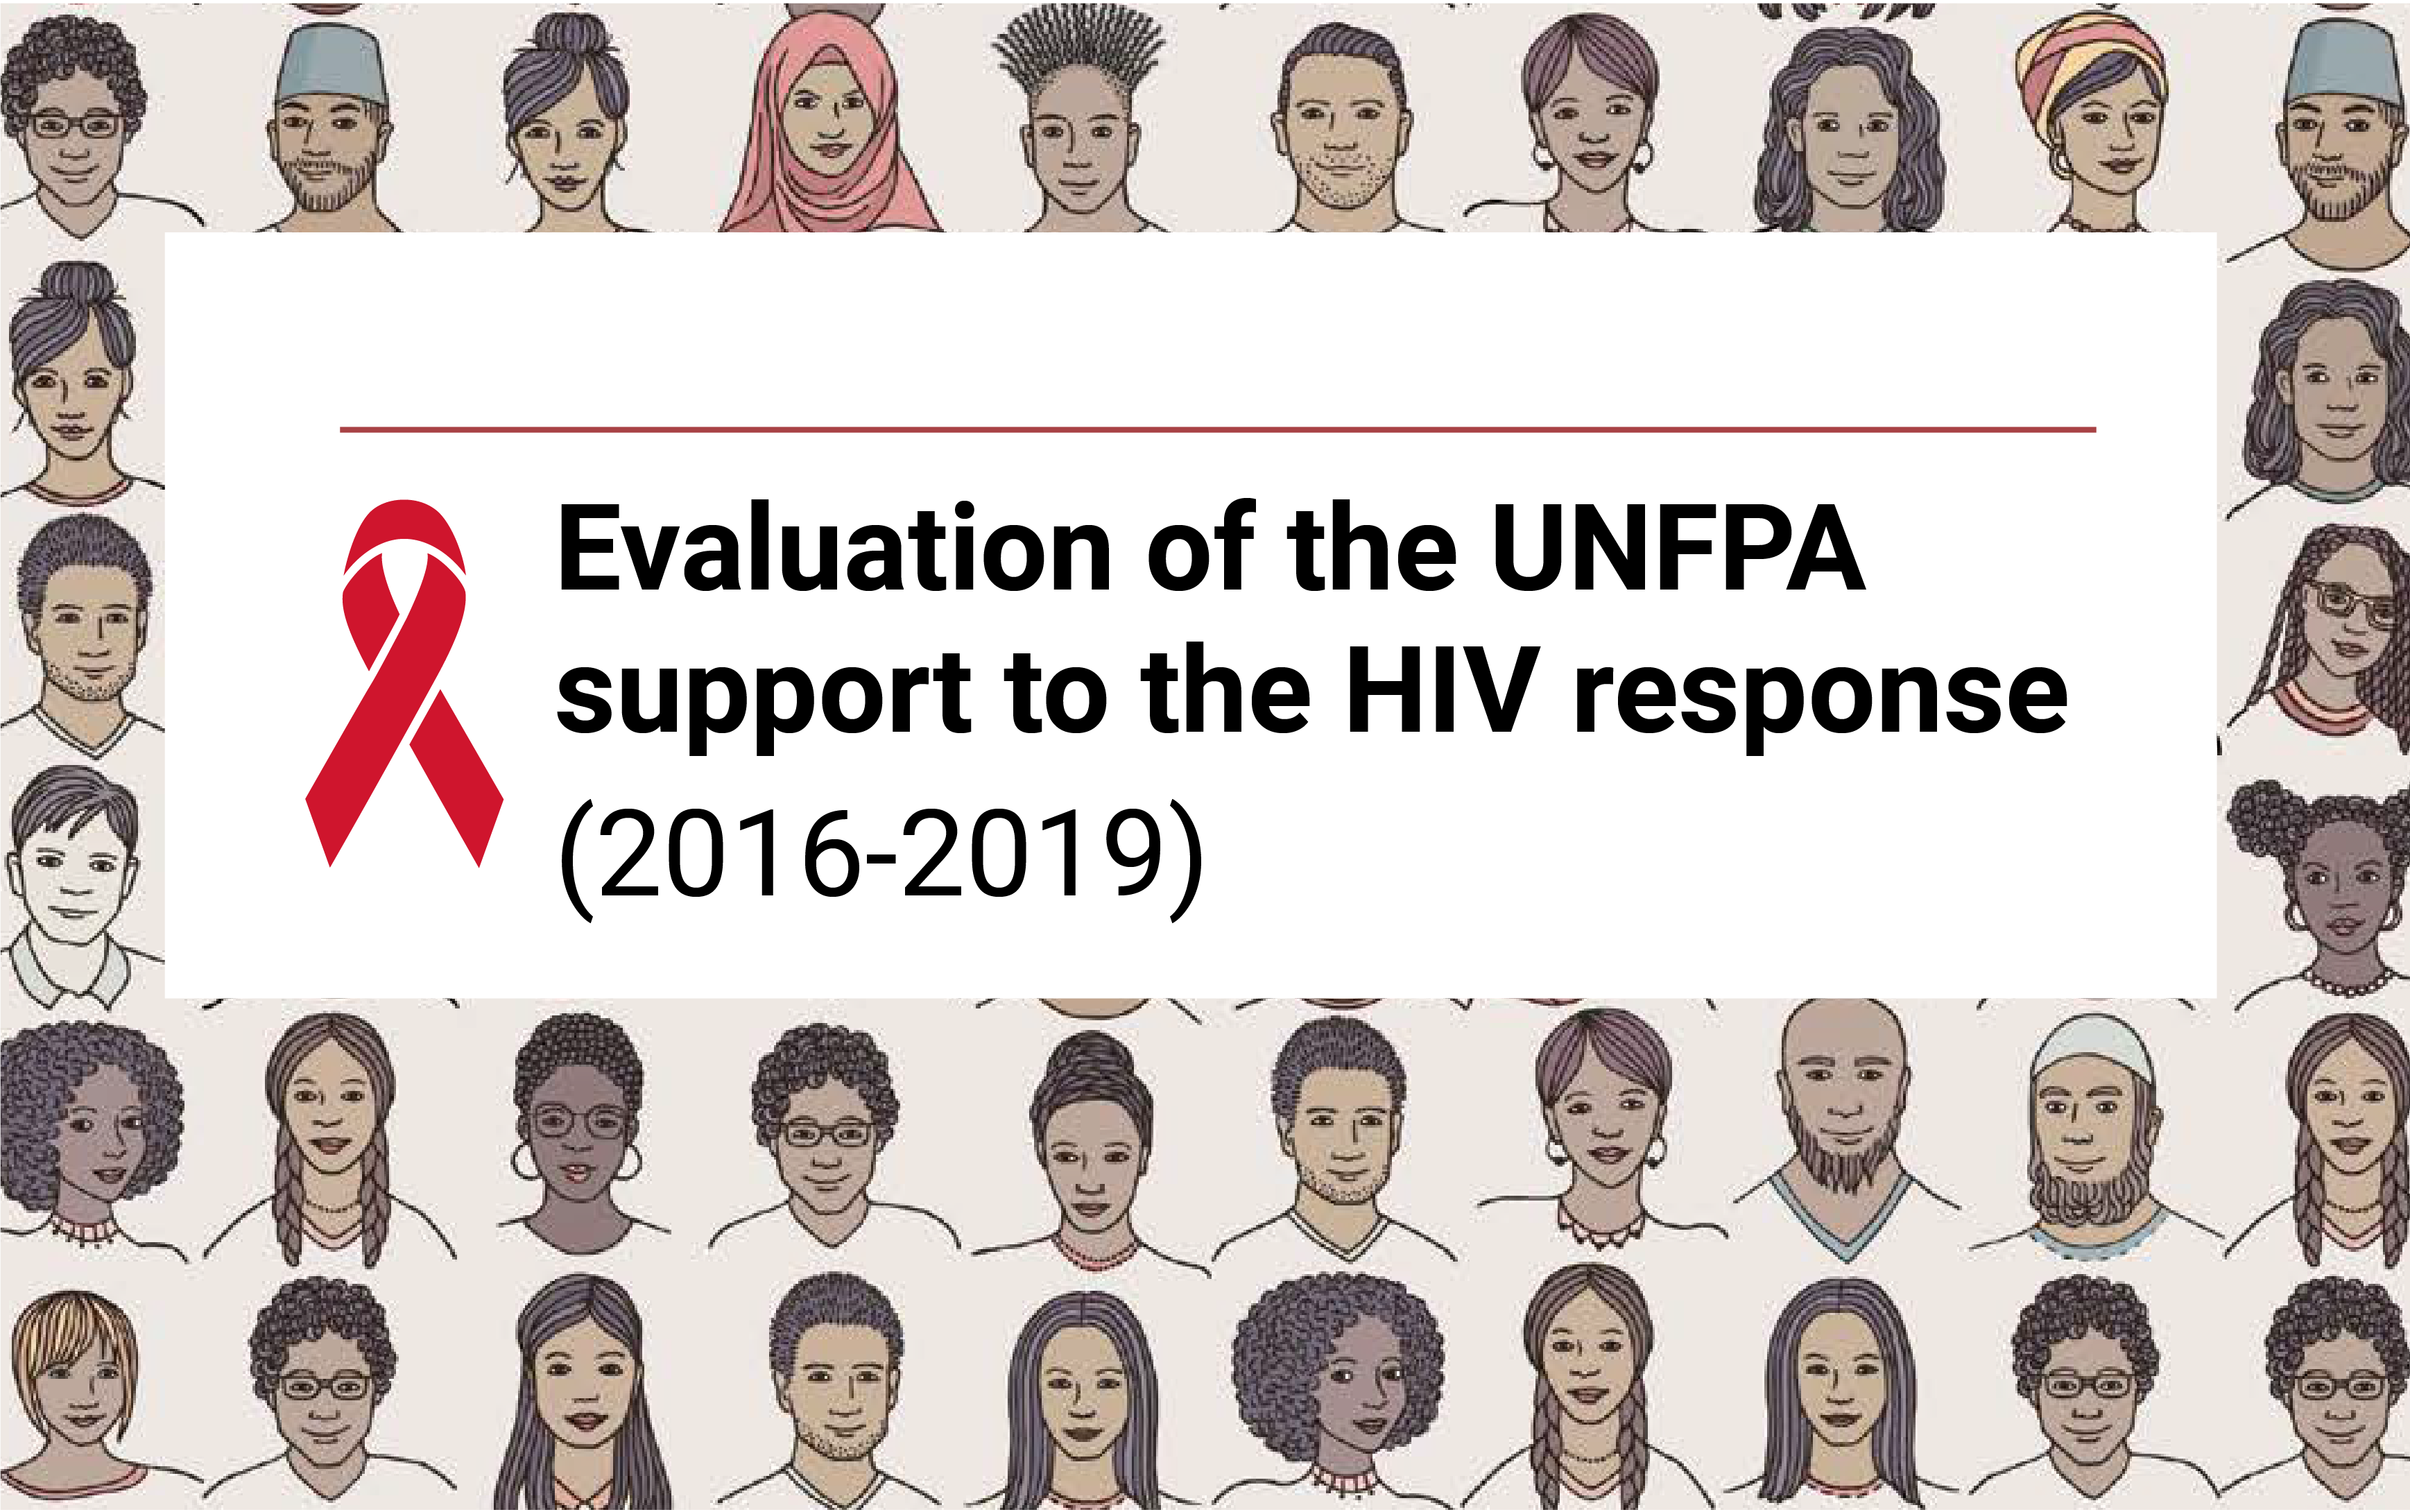 Evaluation of the UNFPA support to the HIV response (2016-2019)